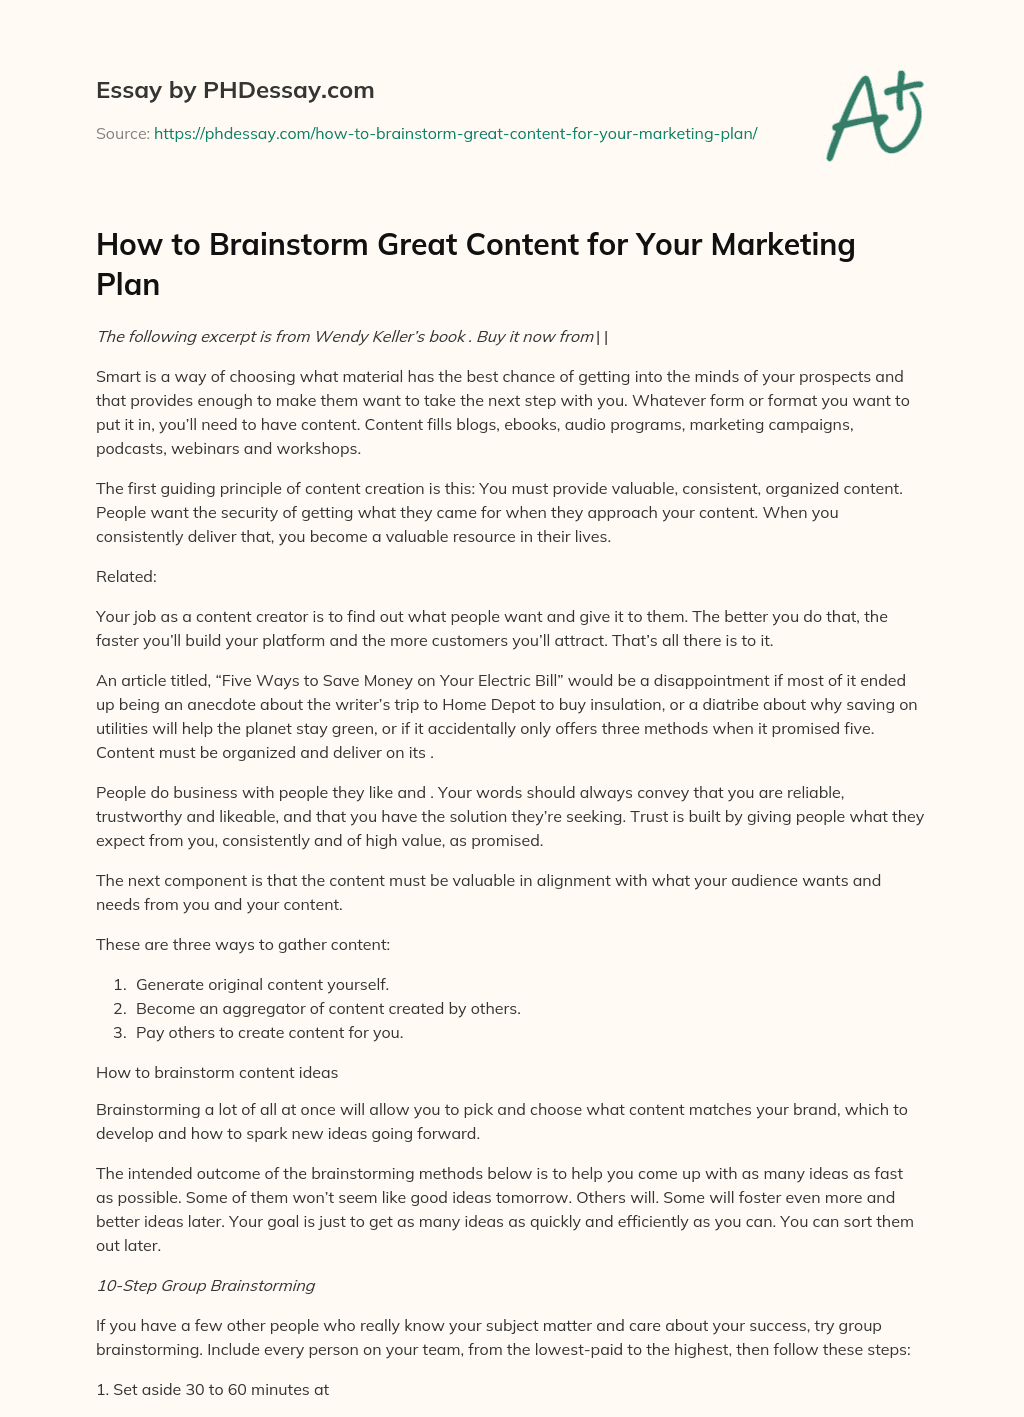 How to Brainstorm Great Content for Your Marketing Plan essay